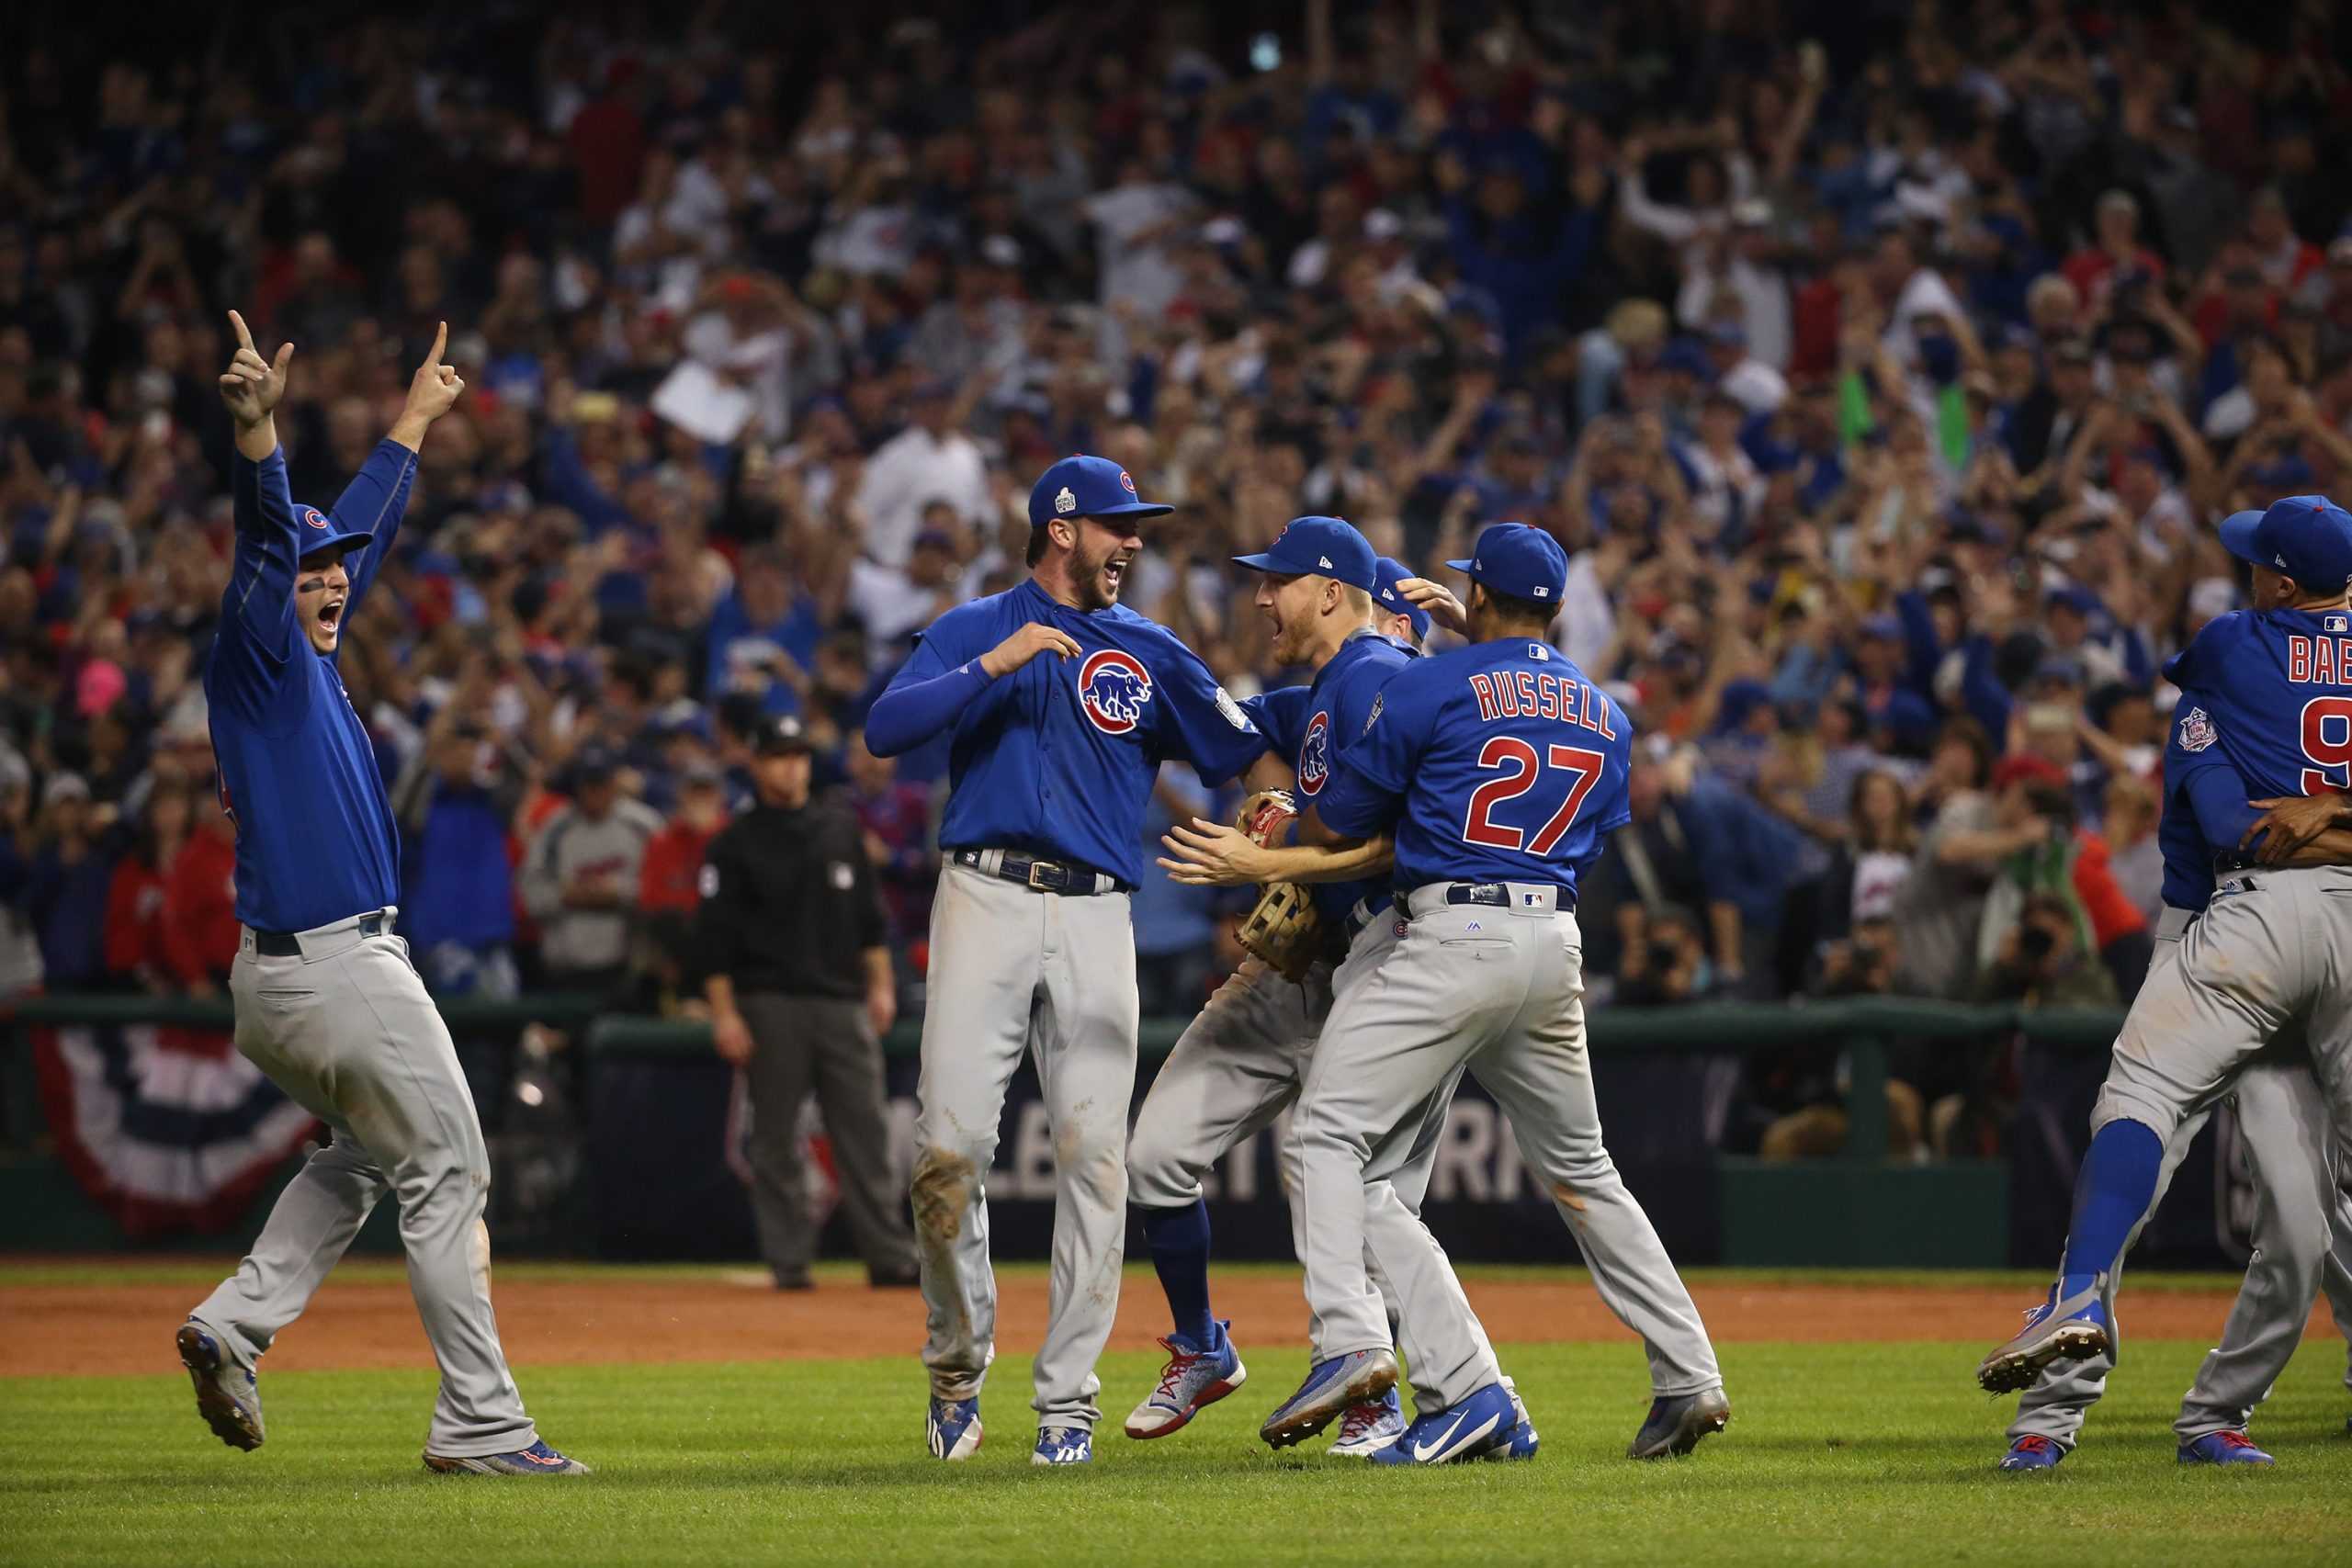 The Cubs reloaded following World Series